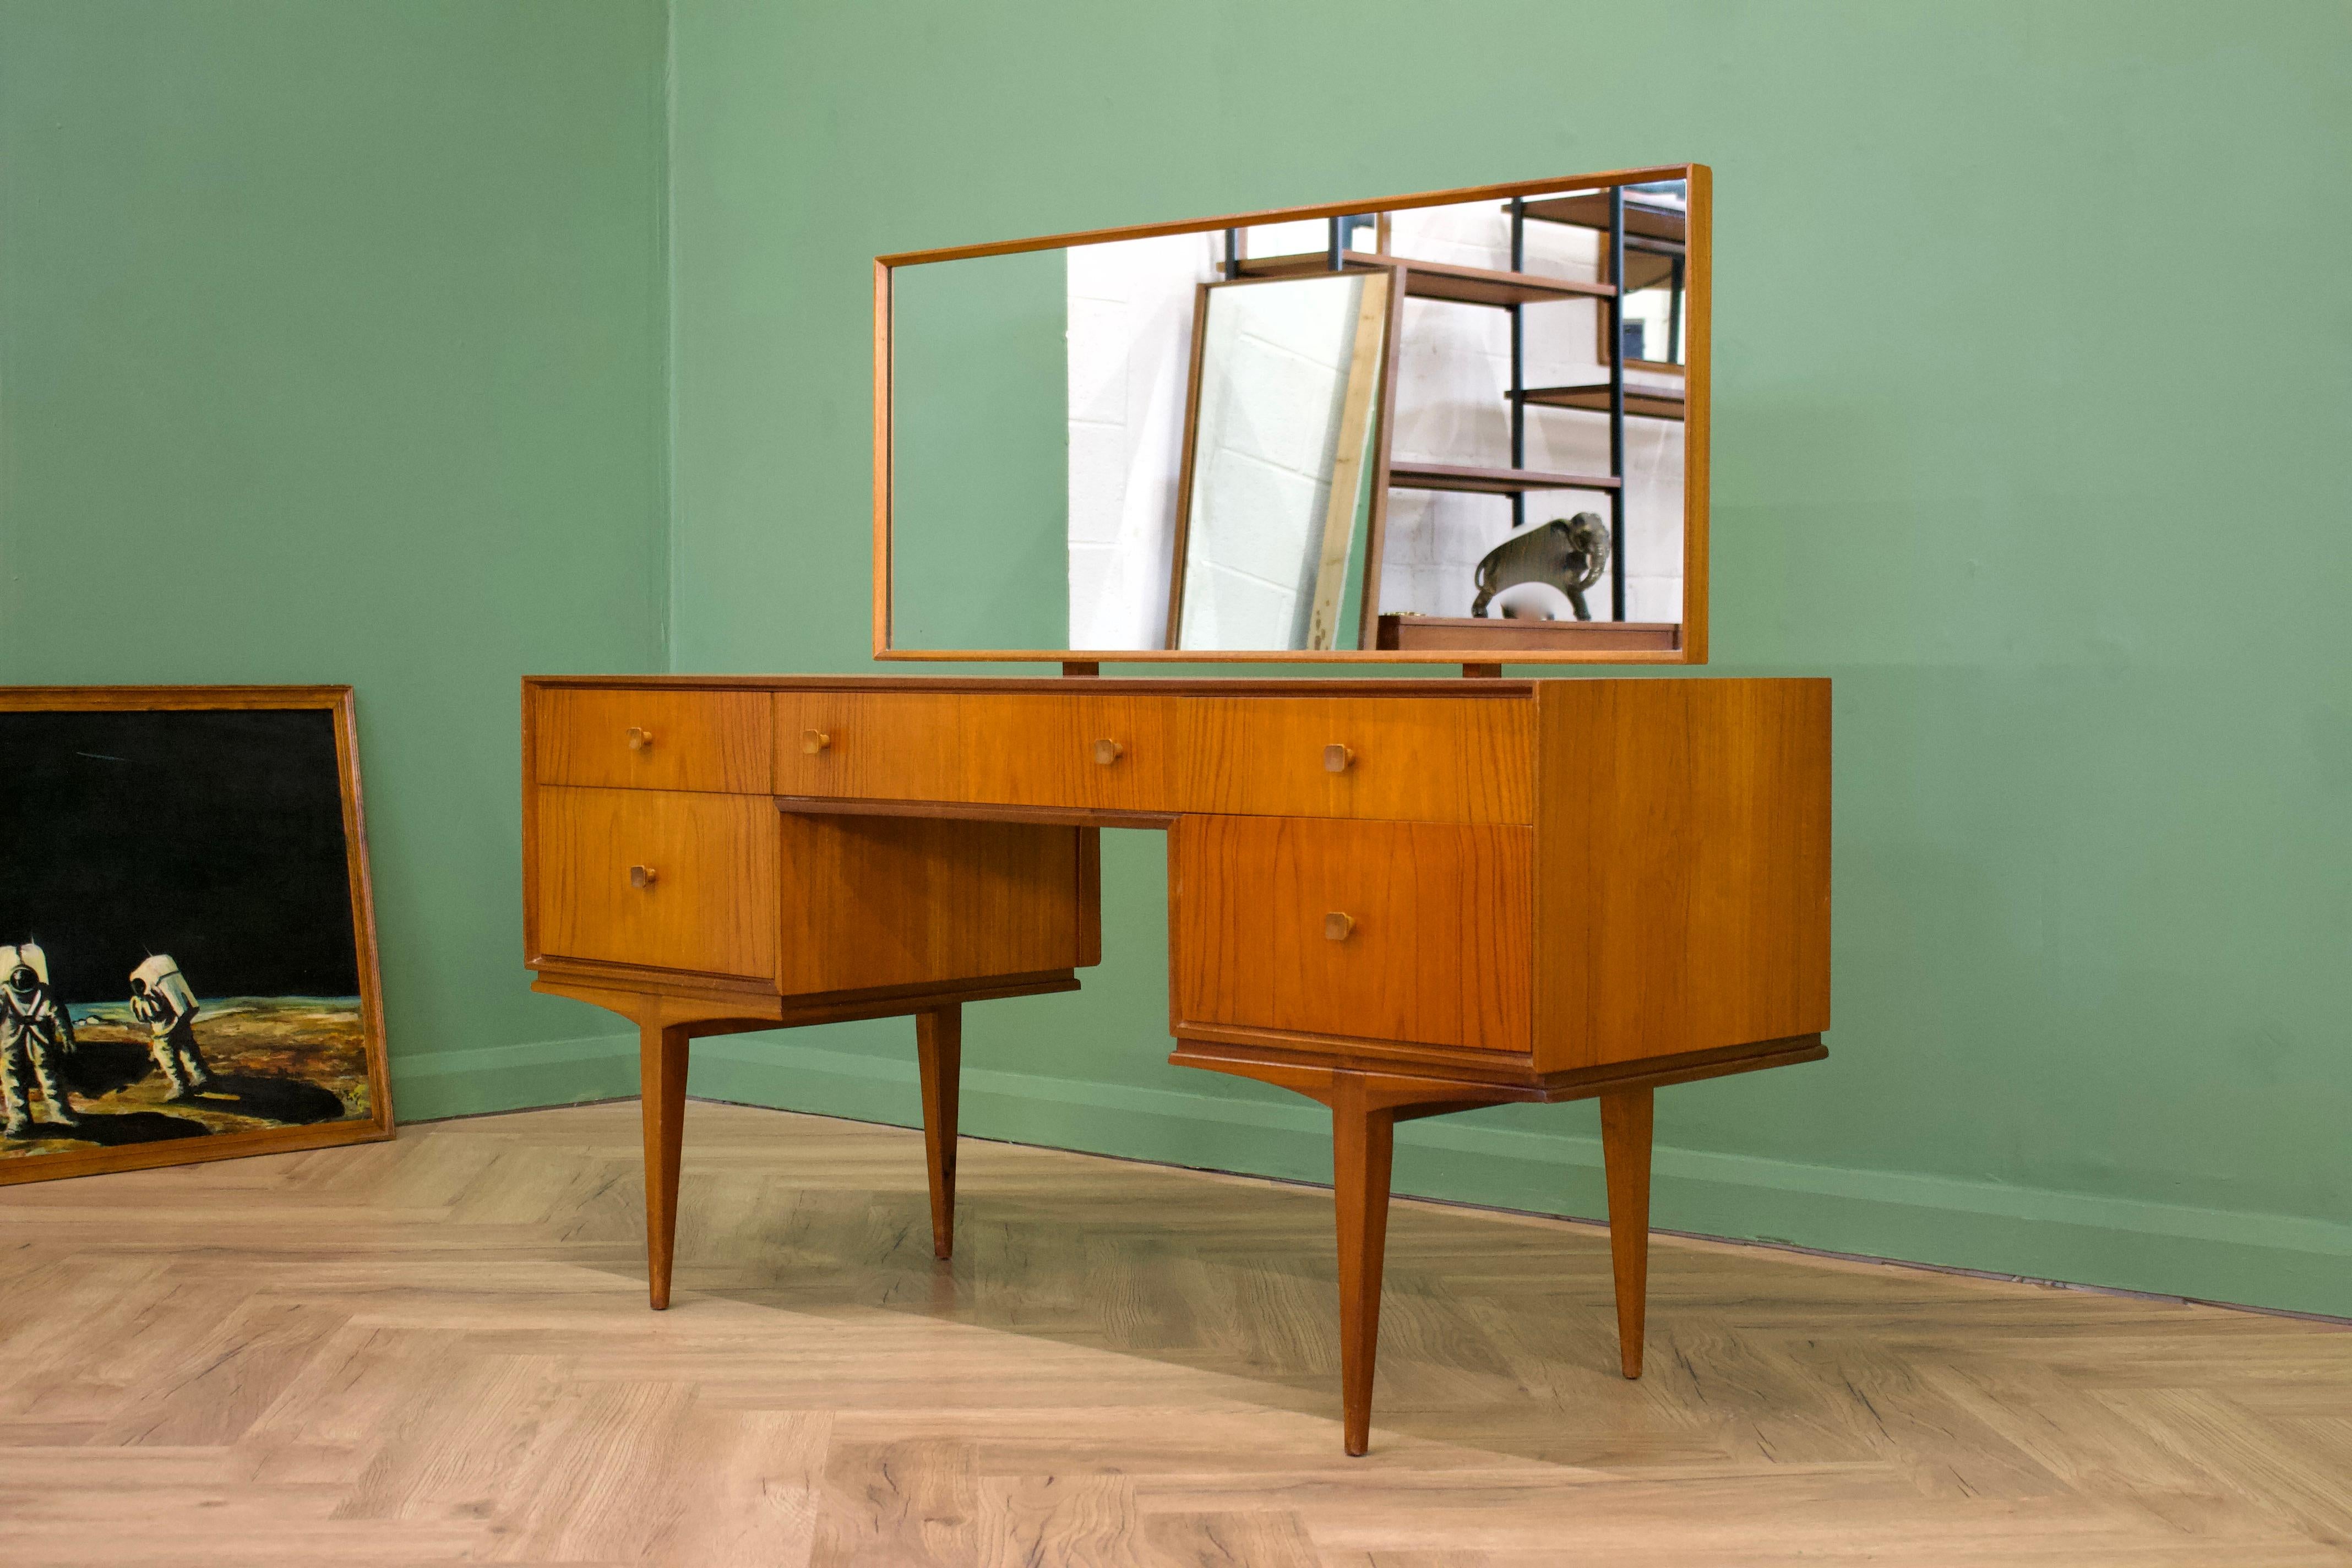 - Mid century dressing table 
- Manufactured in the UK by McIntosh
- Made from Teak & Teak Veneer.

- Featuring 5 drawers.